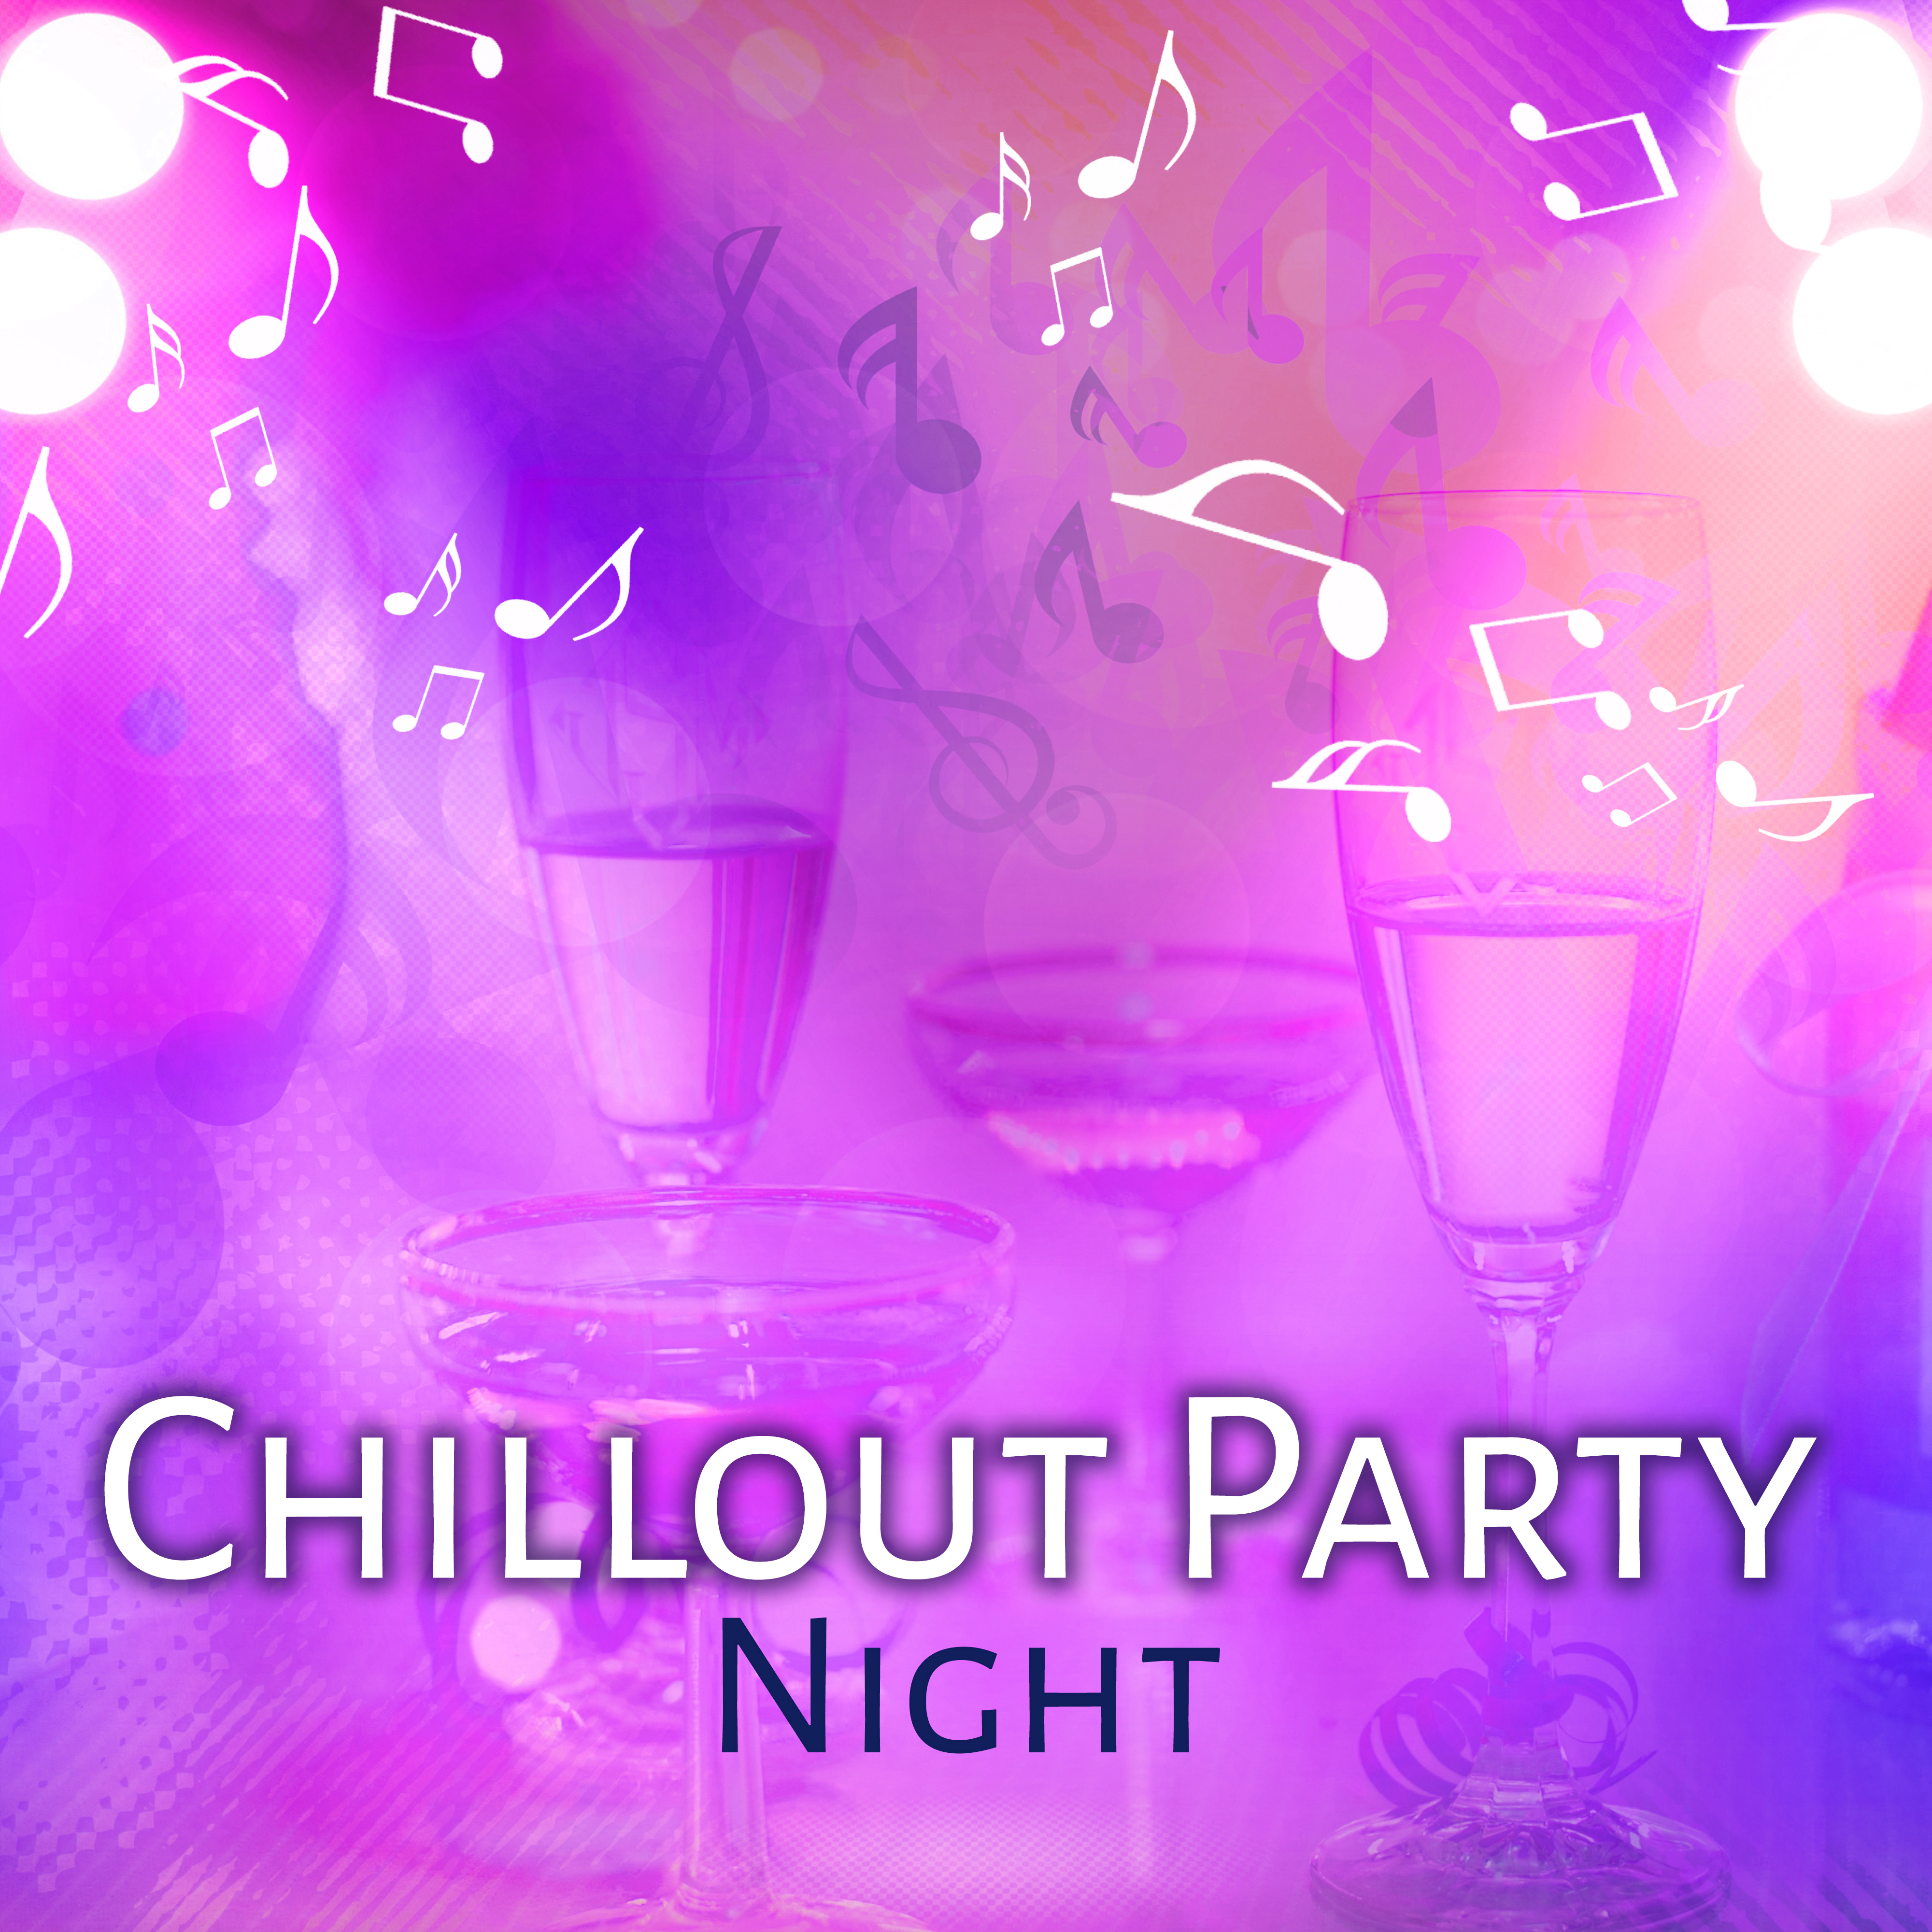 Chillout Party Night  Deep Chillout Music, Summer Party, Dance Music,  Vibrations, Chill Out Lounge, Electro Music